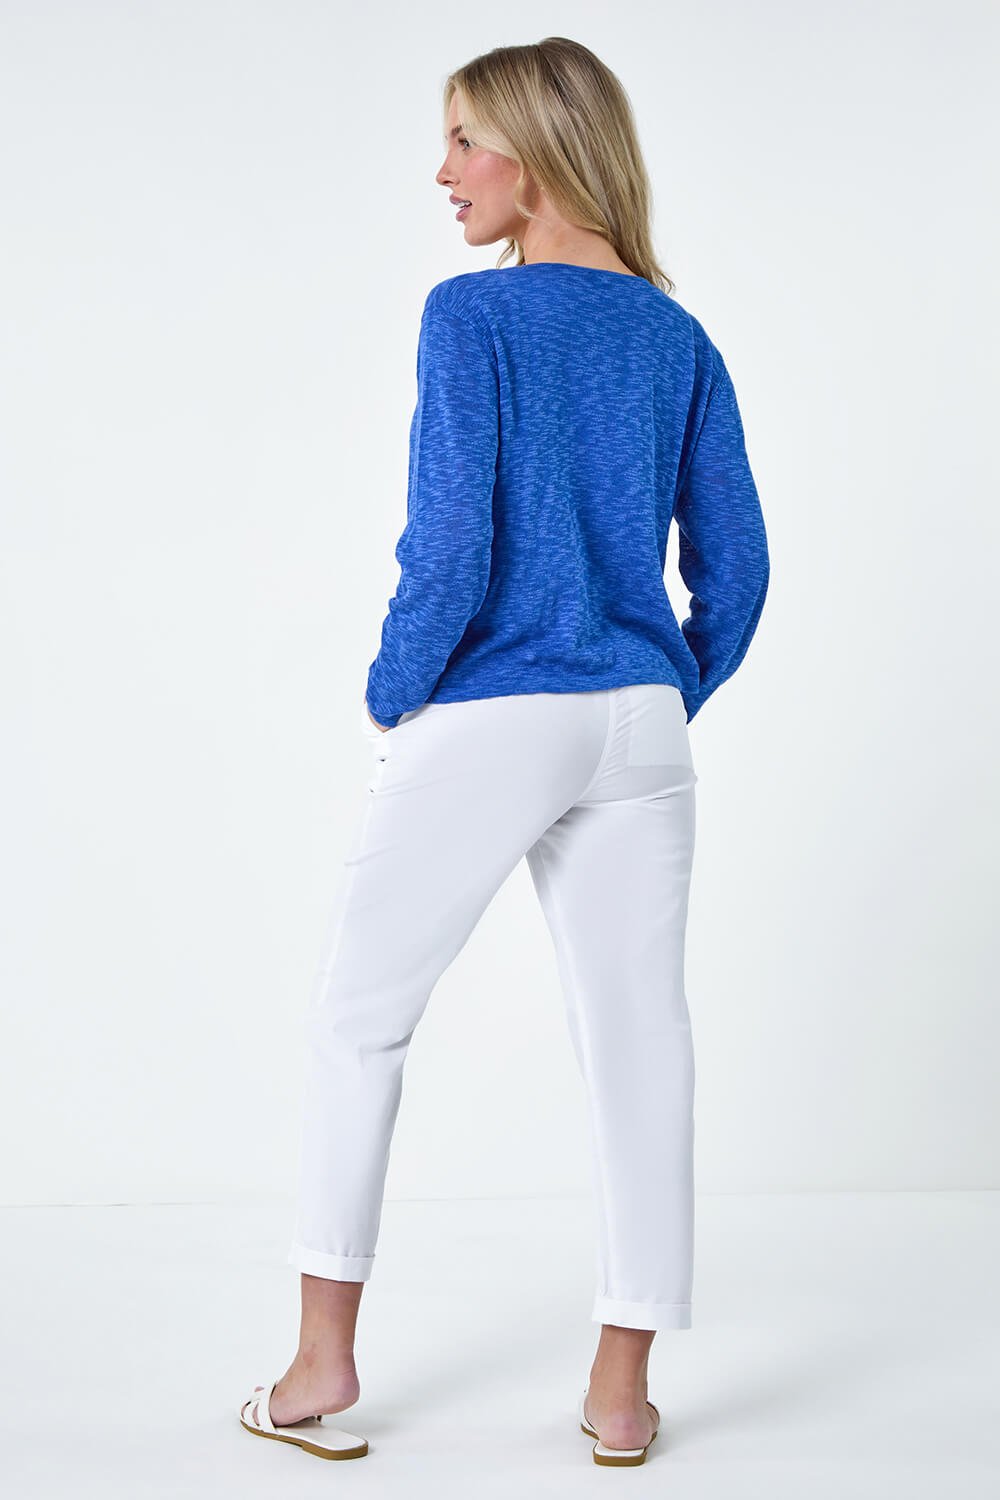 Royal Blue Petite Waterfall Front Cotton Knit Cardigan, Image 3 of 5